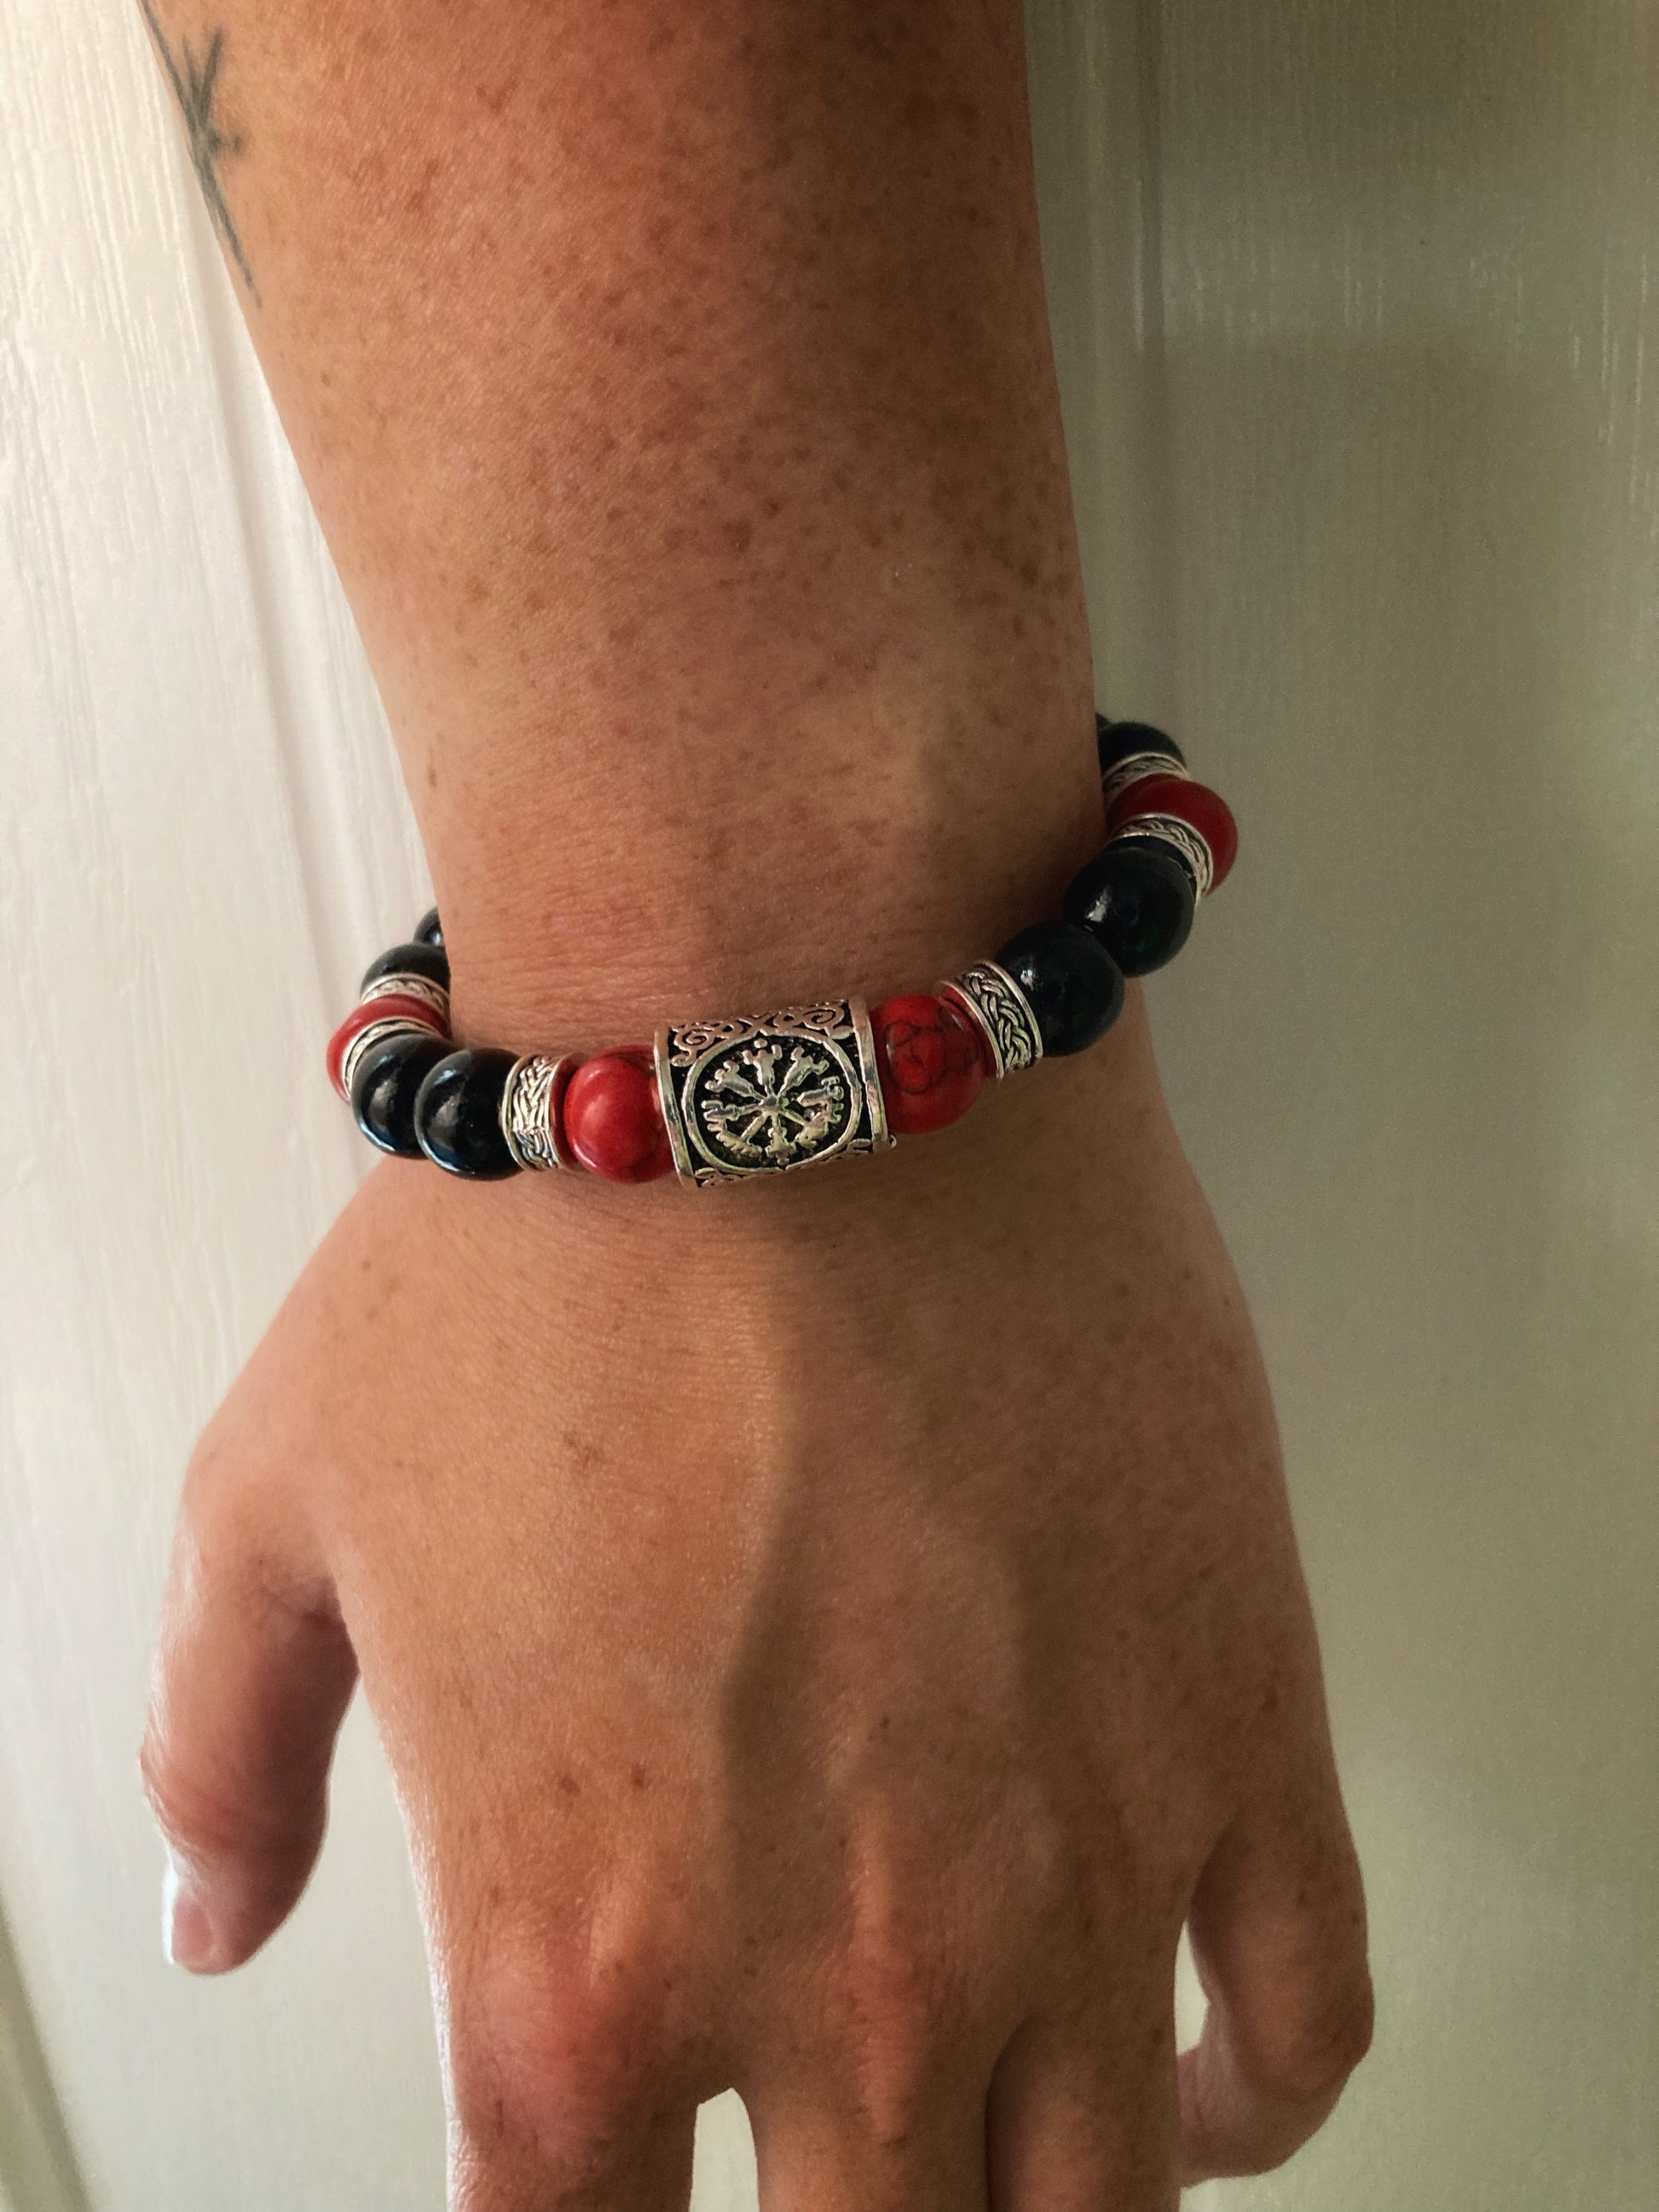 A hand is dangling down with a bead bracelet on the wrist. This features a helm of awe bead at the front with red turquoise beads as well as black ones making up the rest of the bracelet with a few metal patterned pieces throughout.